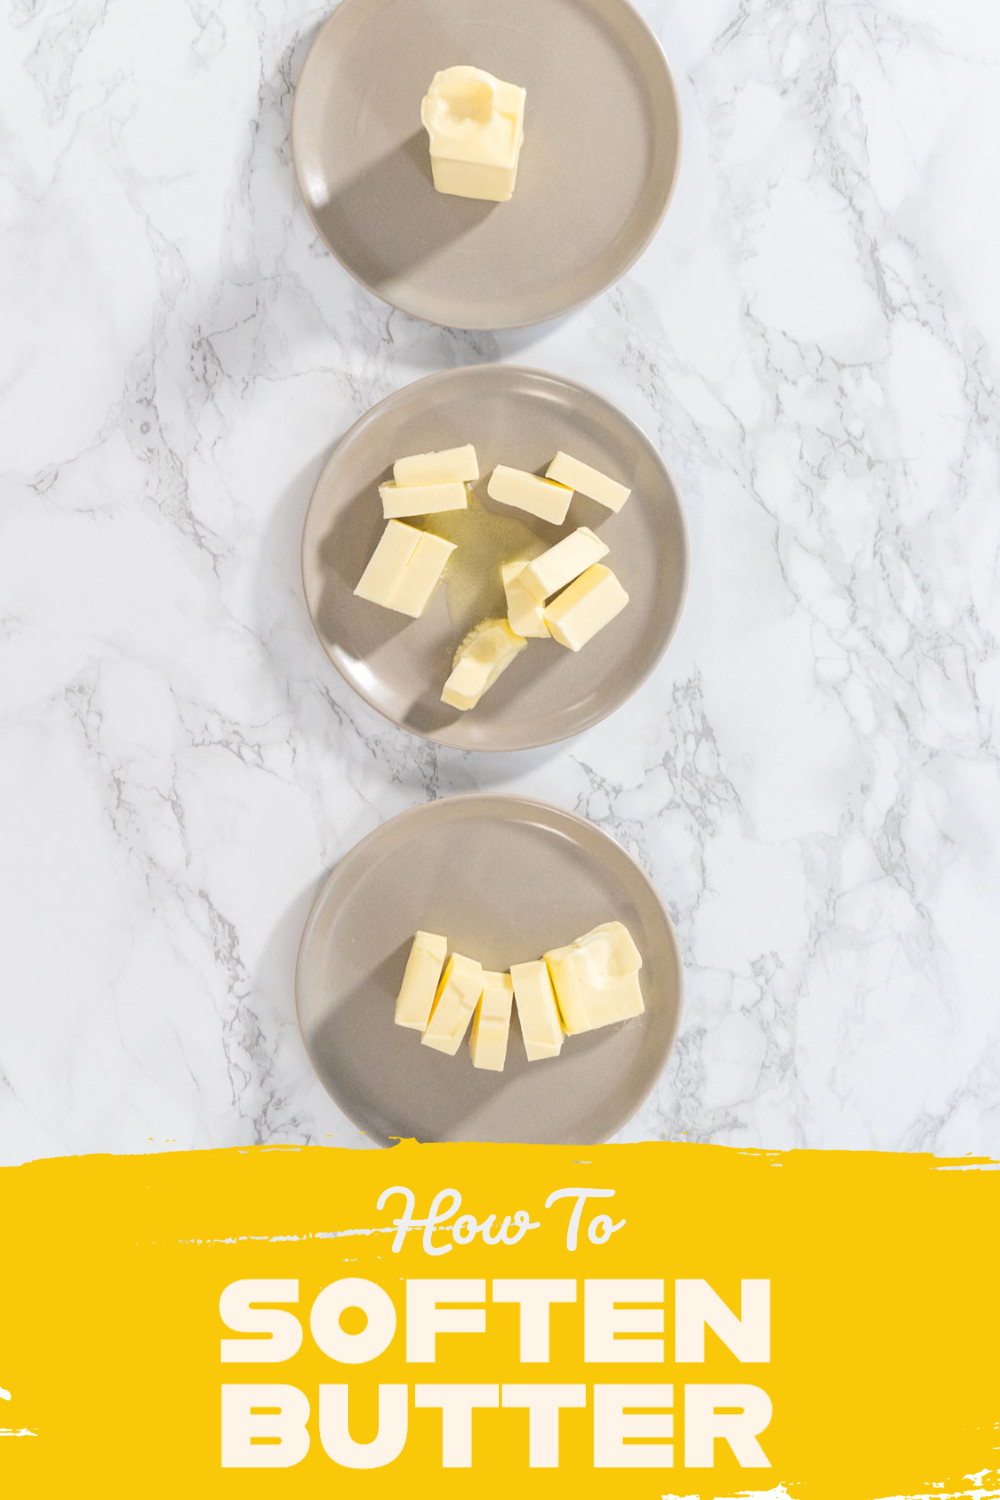 How to soften butter